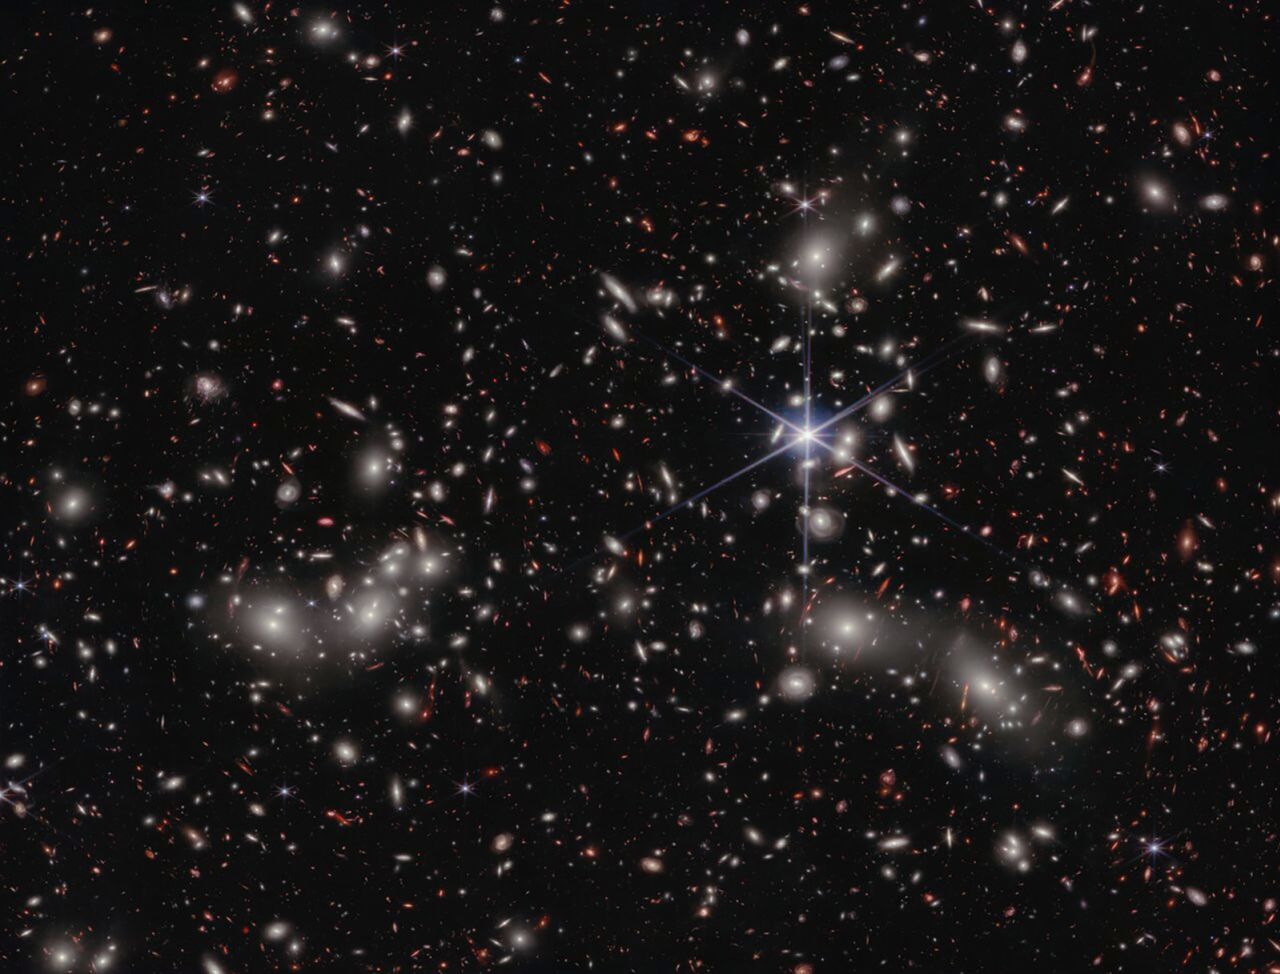 Webb telescope spots surprisingly massive galaxies from the early universe | CNN